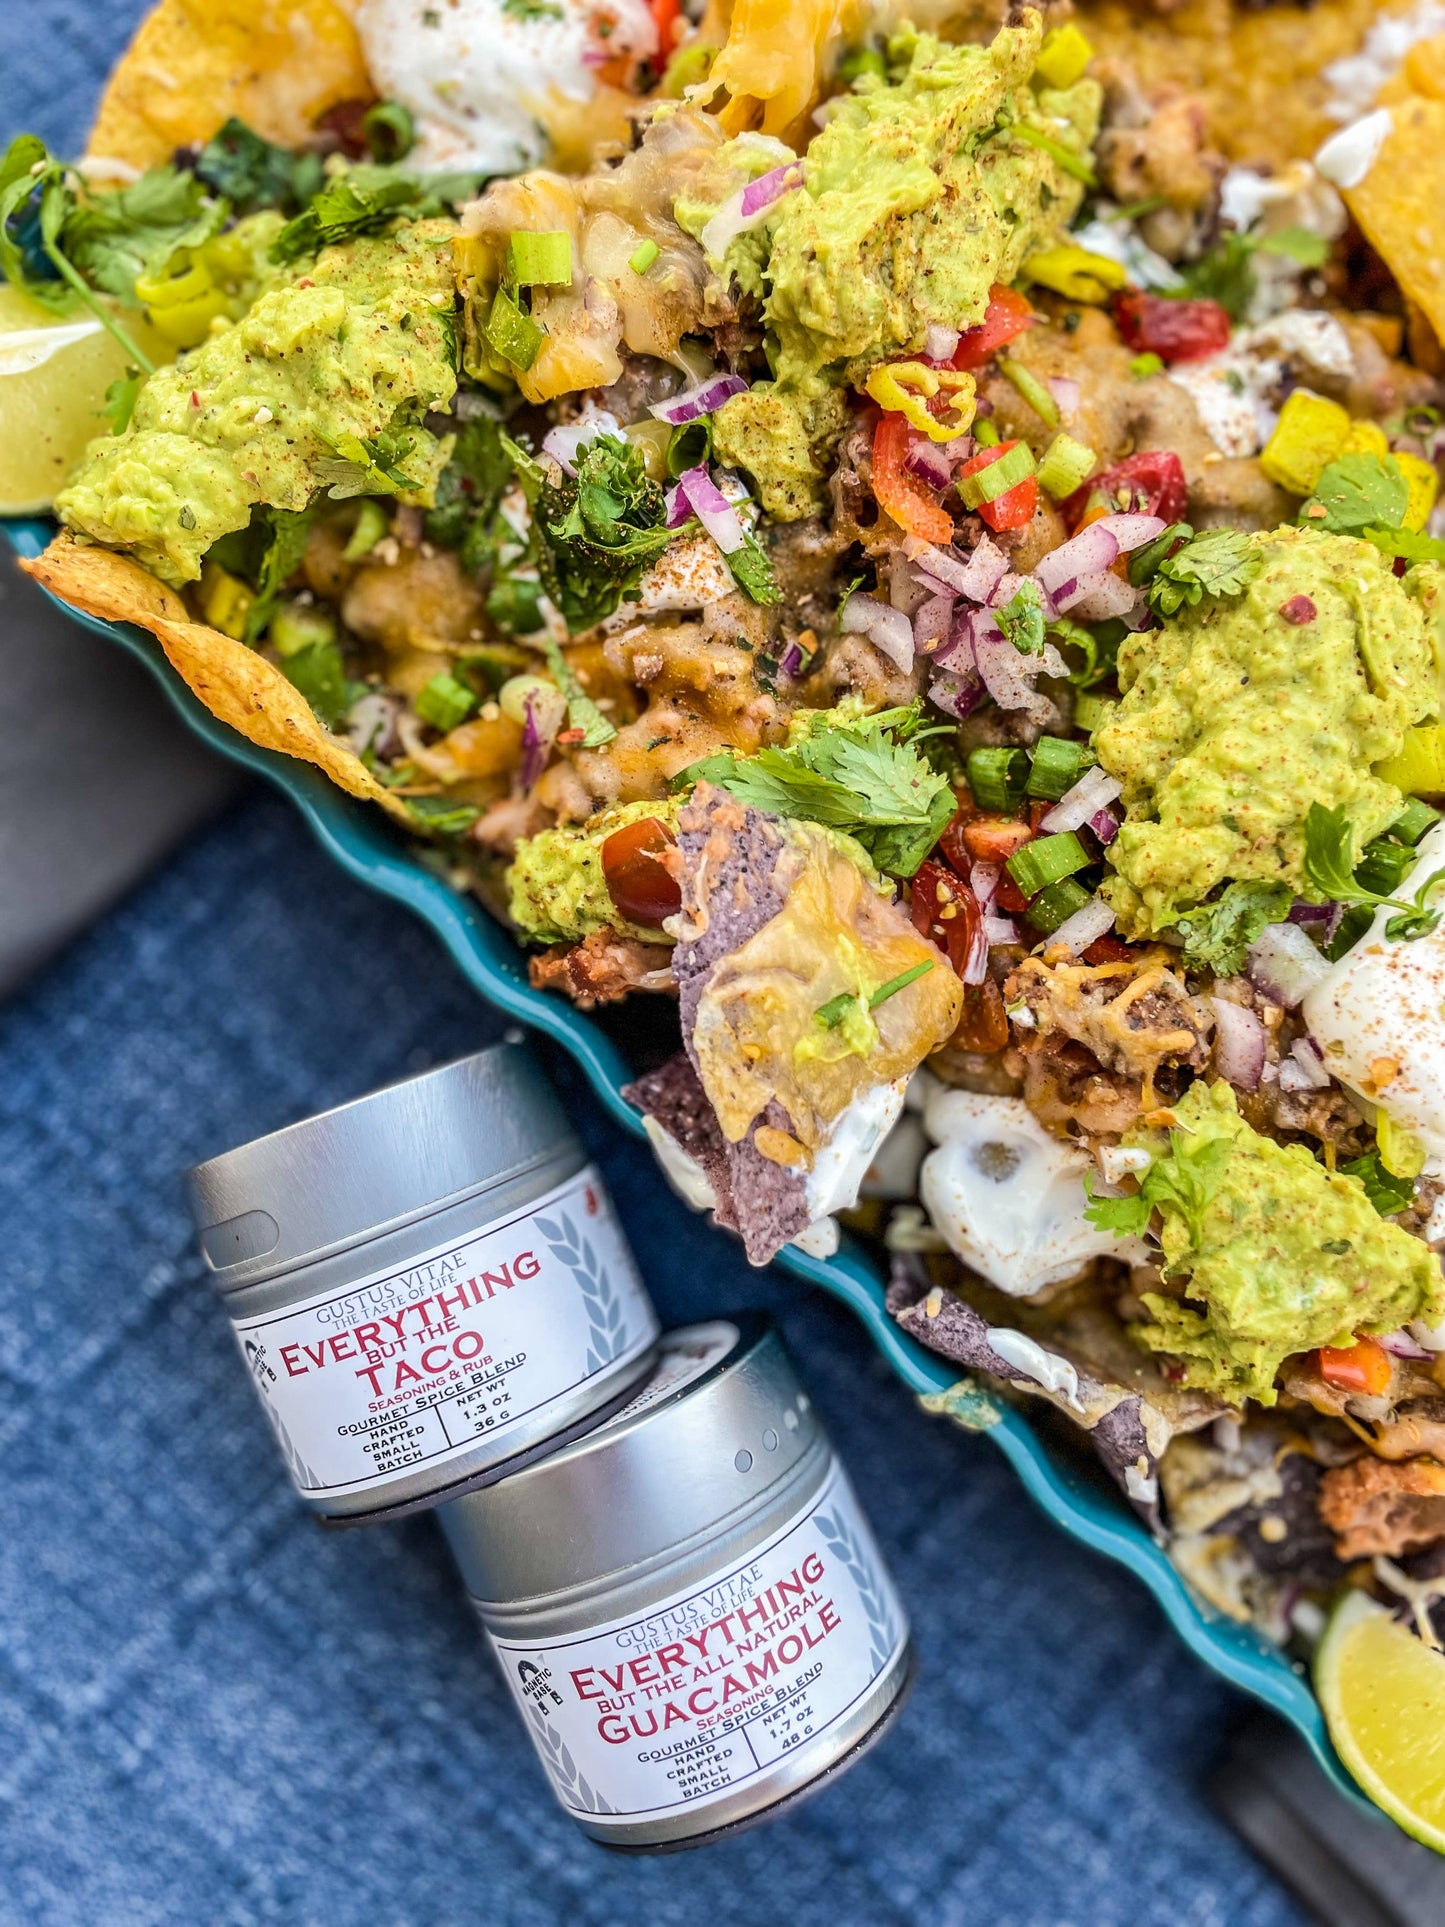 Everything But the All Natural Guacamole Seasoning